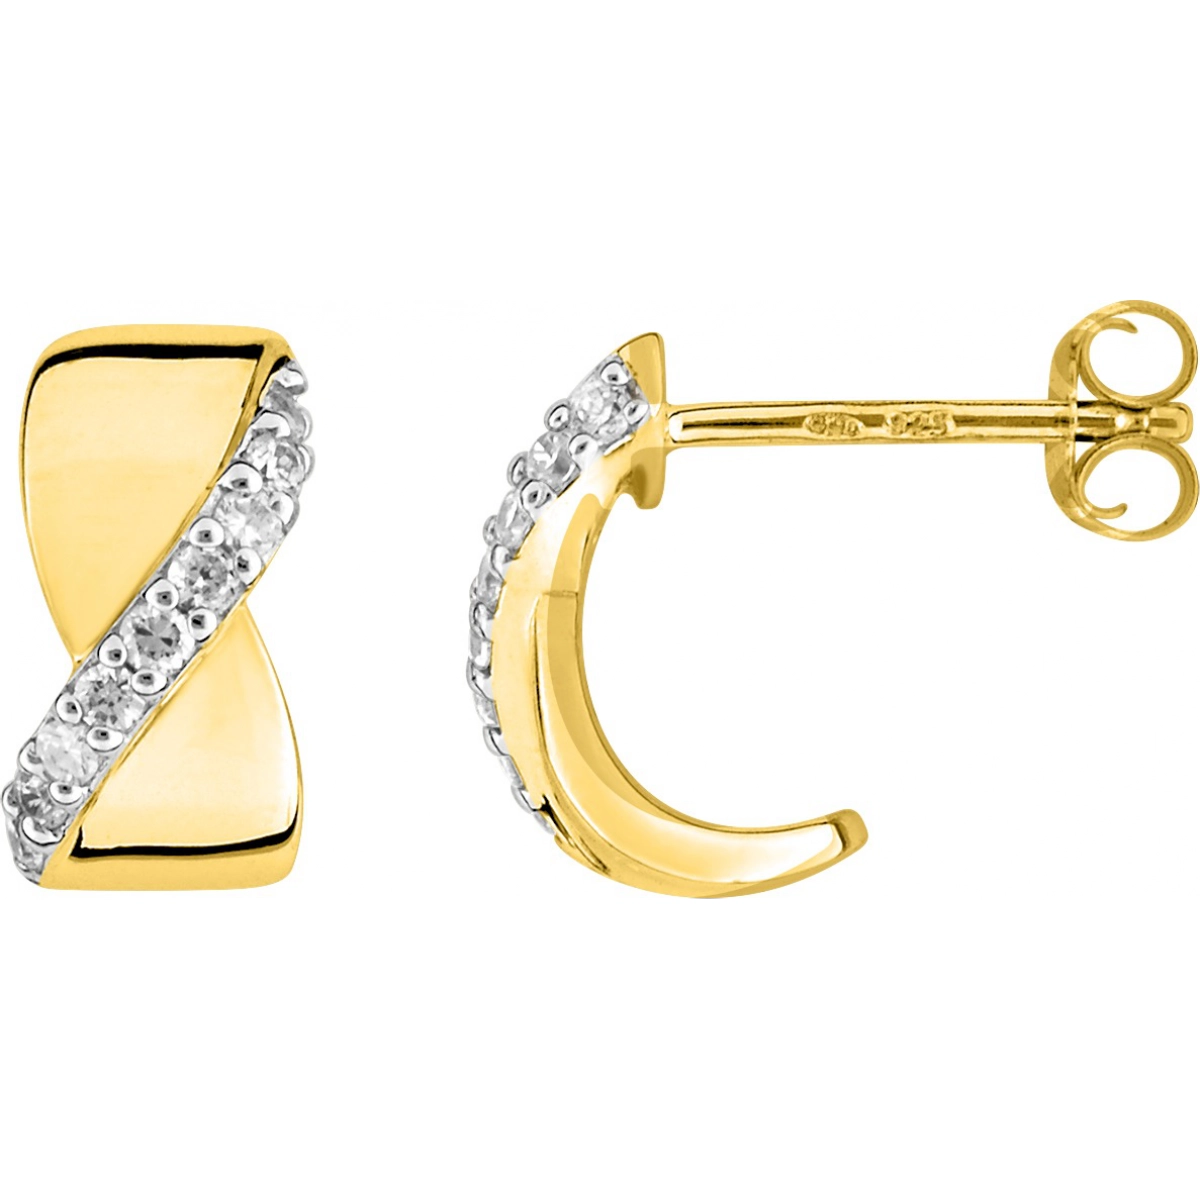 Earrings pair w. cz and rh gold plated Brass  Lua Blanca  BSWU98Z.0